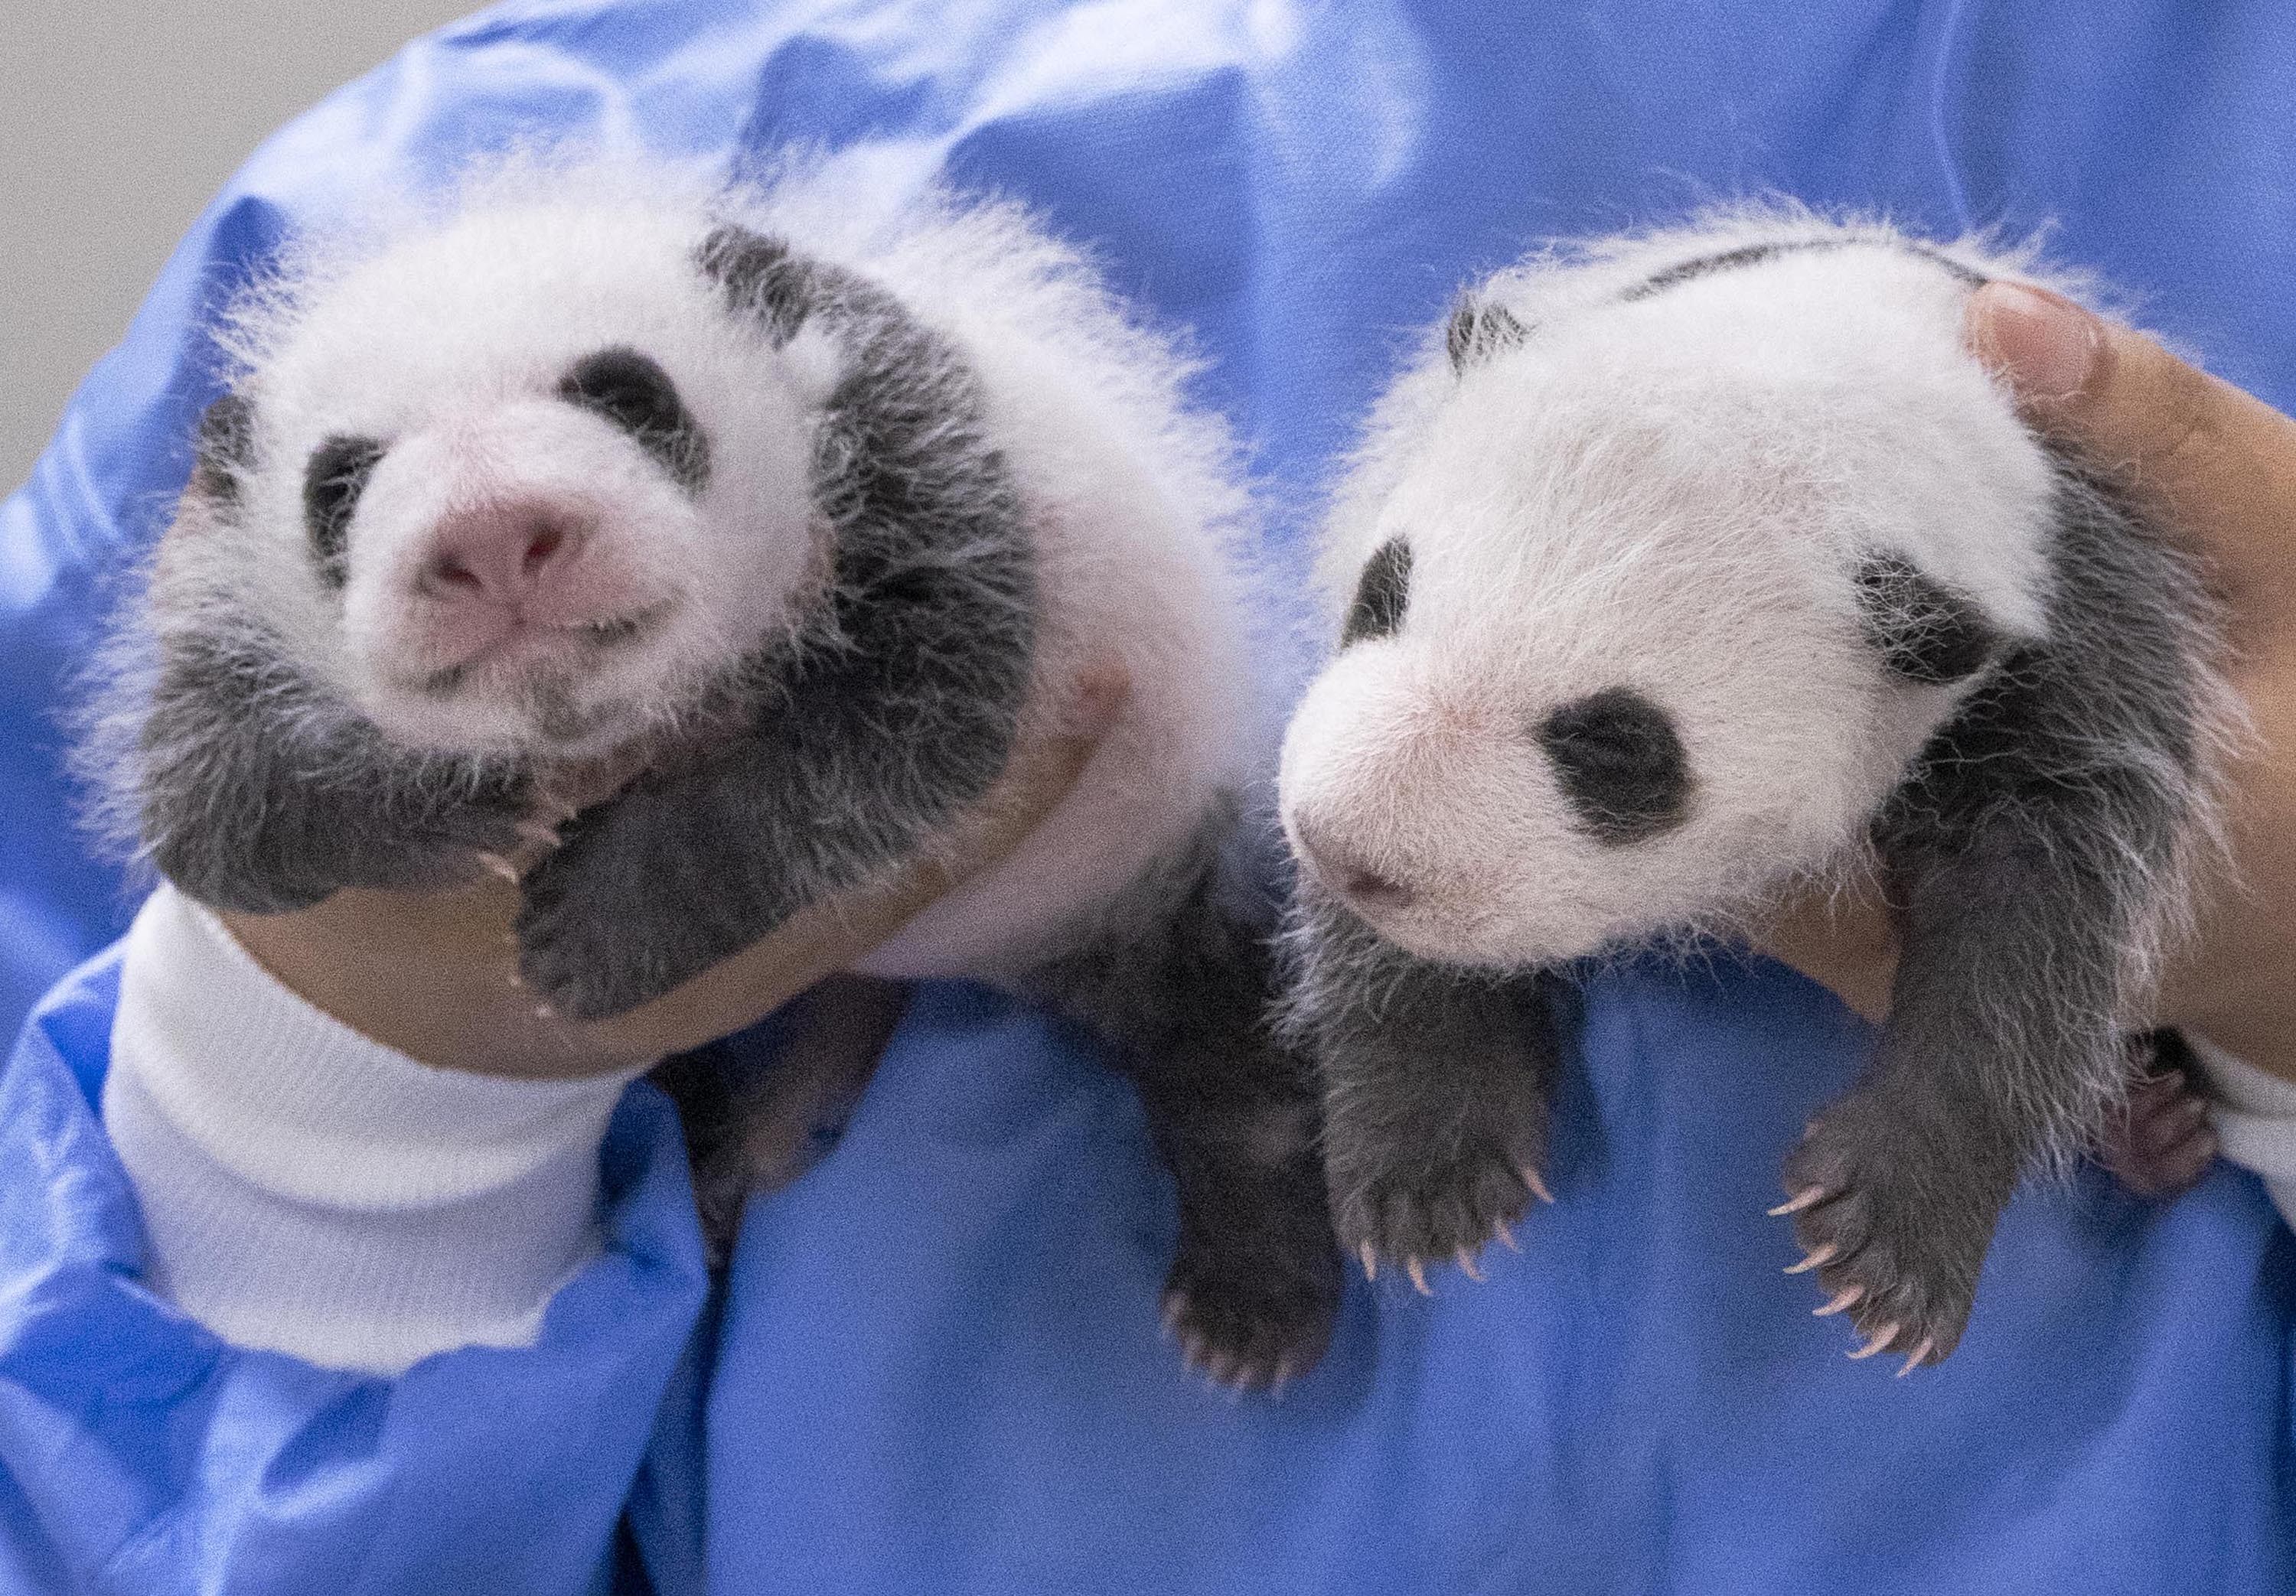 Two one-month-old giant panda cubs at Everland Resort in Yongin, South Korea. The twins will be named once they reach 100 days old. Photo: Xinhua